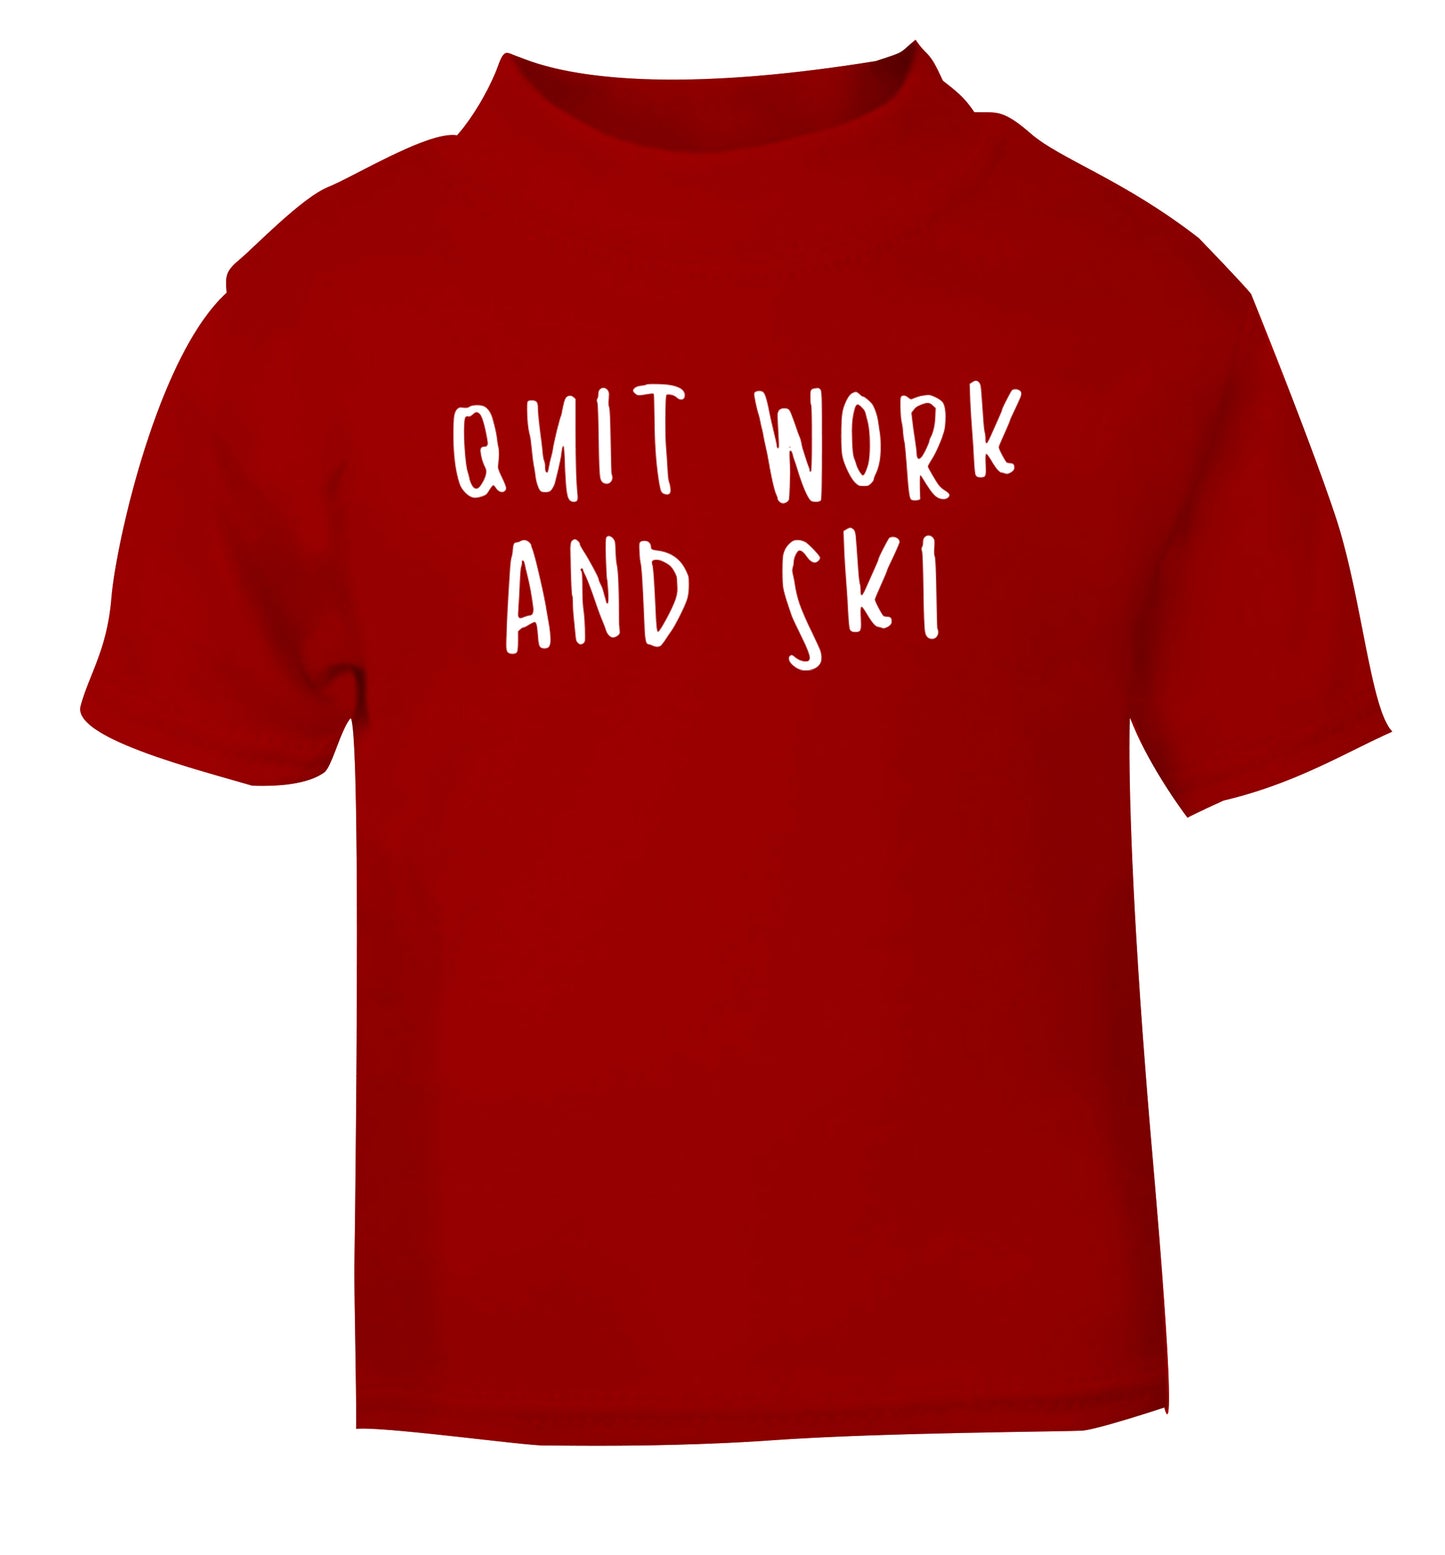 Quit work and ski red Baby Toddler Tshirt 2 Years